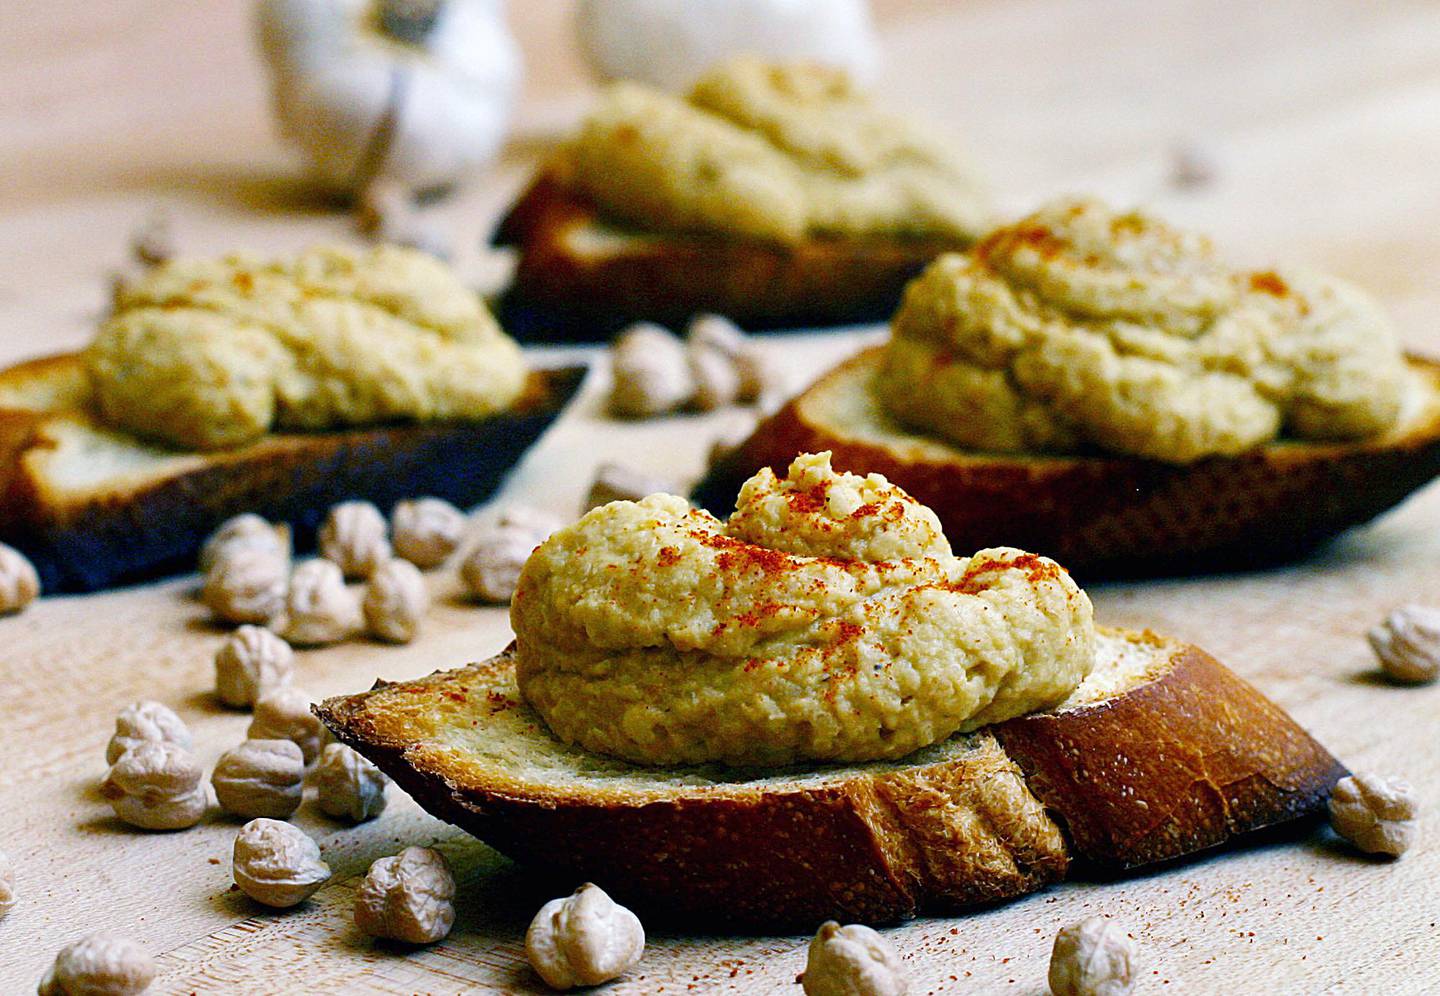 ** FOR USE WITH AP WEEKLY FEATURES **   Rustic Hummus, the result of tinkering with an old favorite, is a version of the basic hummus that for many people is a culinary staple. The recipe includes sesame seeds and chickpeas with lime juice, garlic and honey for flavor, plus a garnish of a dusting of paprika. (AP Photo/Larry Crowe)